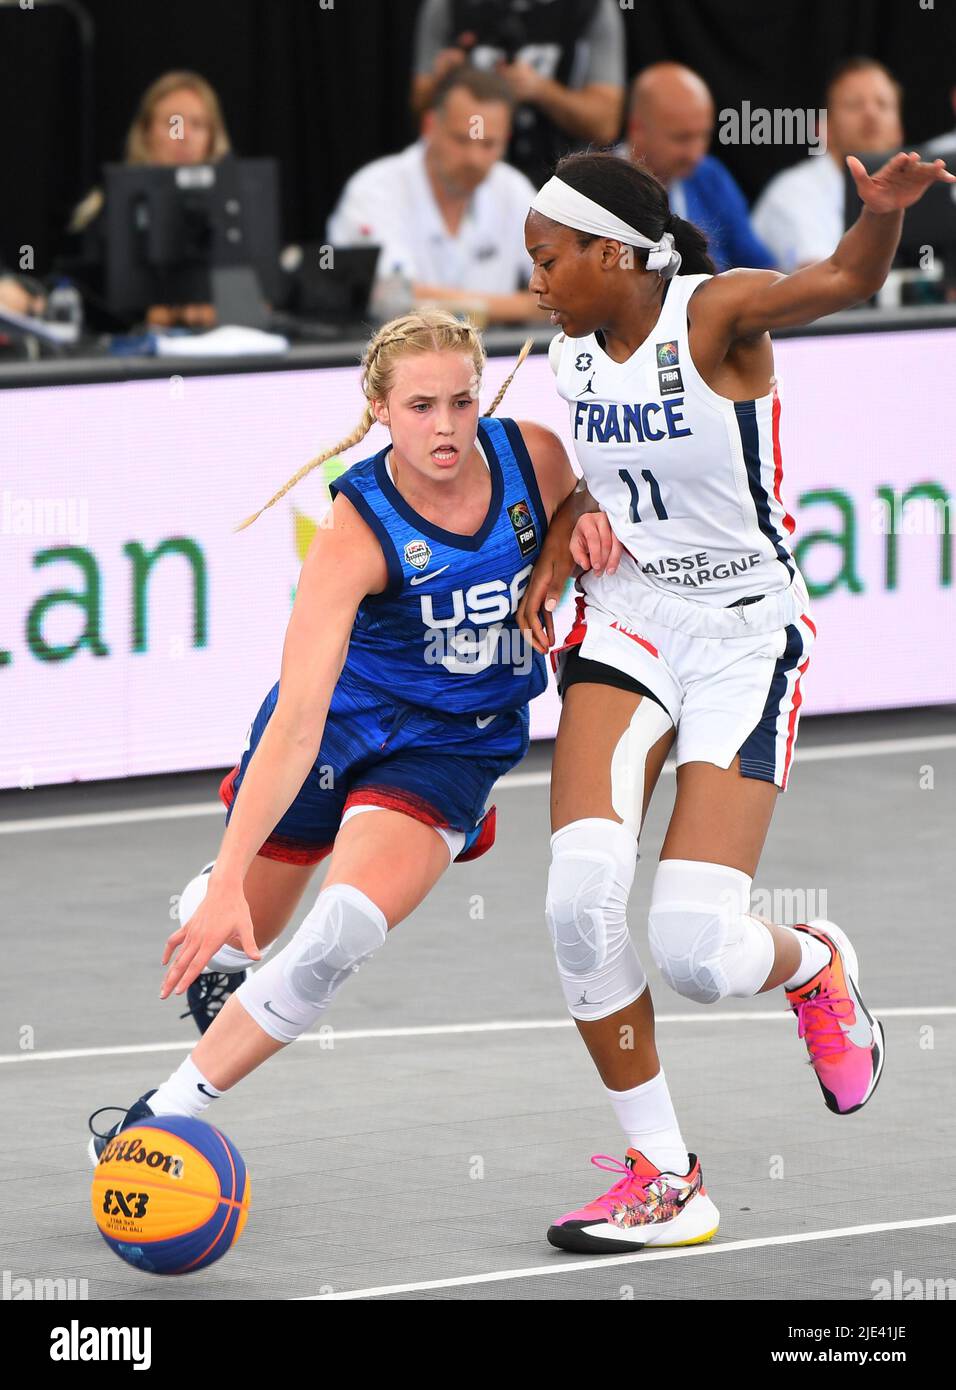 Antwerp, Belgium. 24th June, 2022. Hailey Van Lith (L) of the United States dribbles under the defense of Myriam Djekoundade of France during the FIBA 3X3 World Cup women's pool round match between the United States and France in Antwerp, Belgium, June 24, 2022. Credit: Ren Pengfei/Xinhua/Alamy Live News Stock Photo